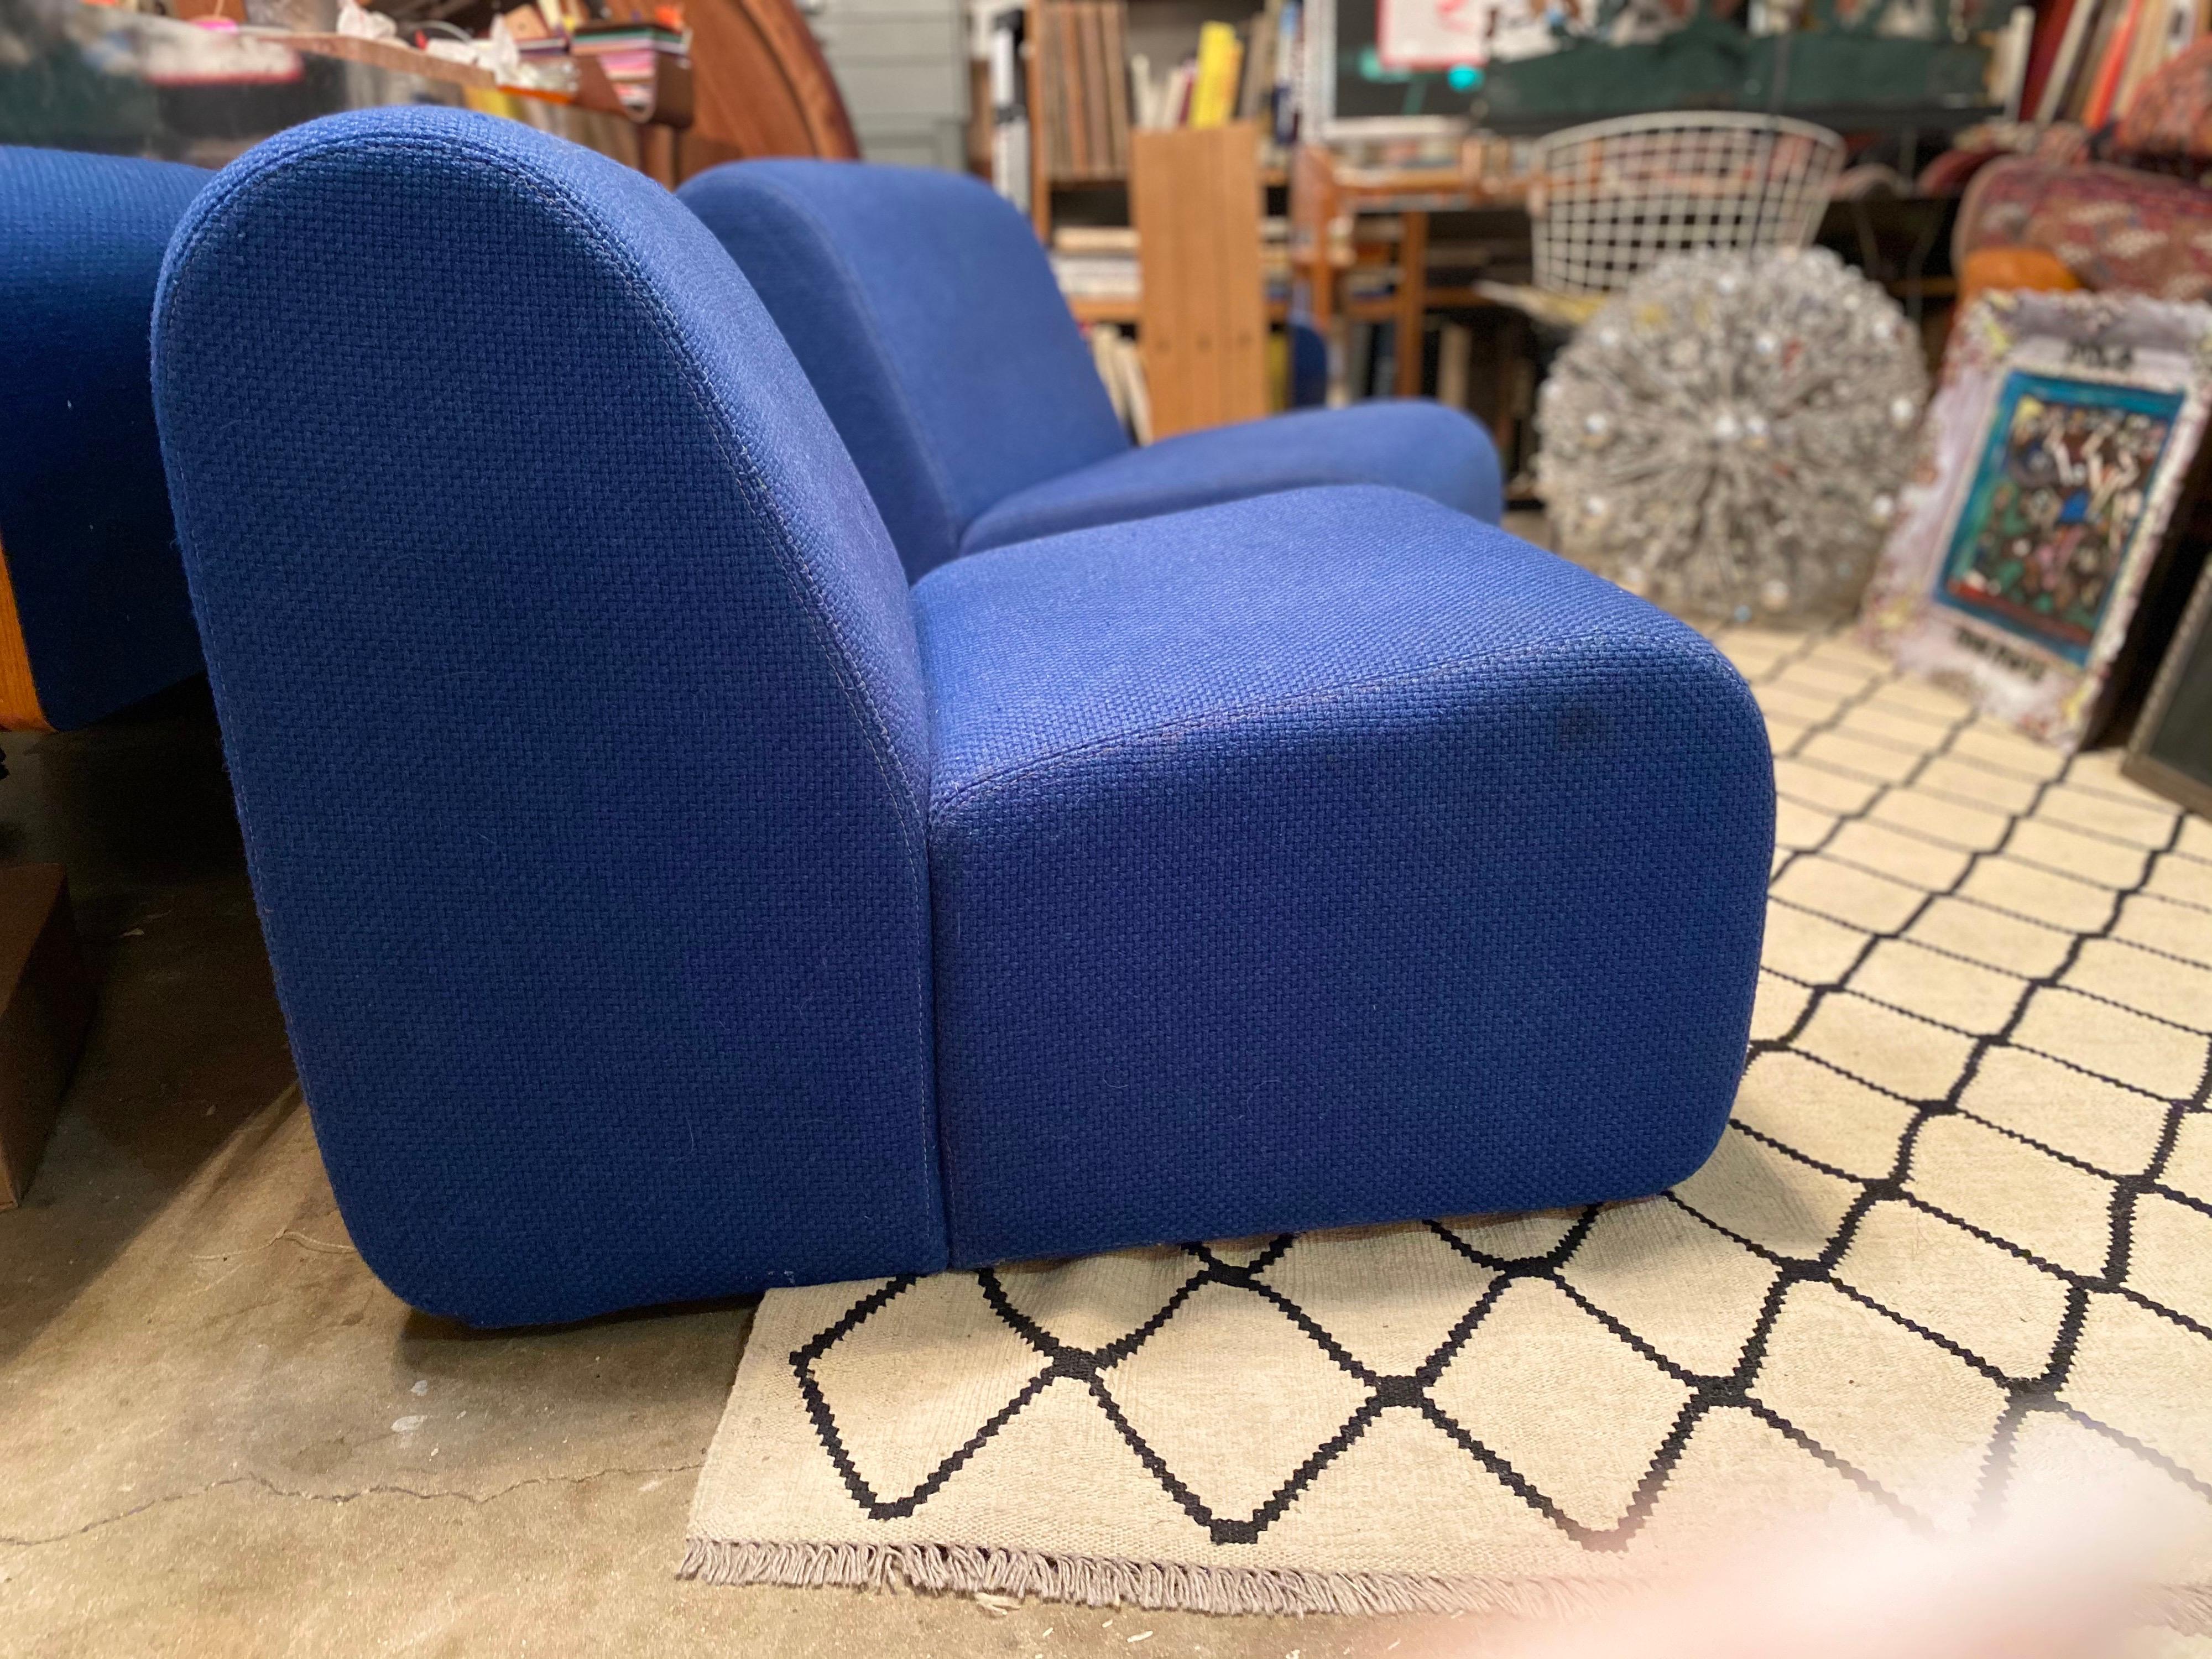 Mid-Century Modern designed by John Mascheroni features blue fabric and a low seat. These mid-century lounge chairs are in good overall vintage condition.